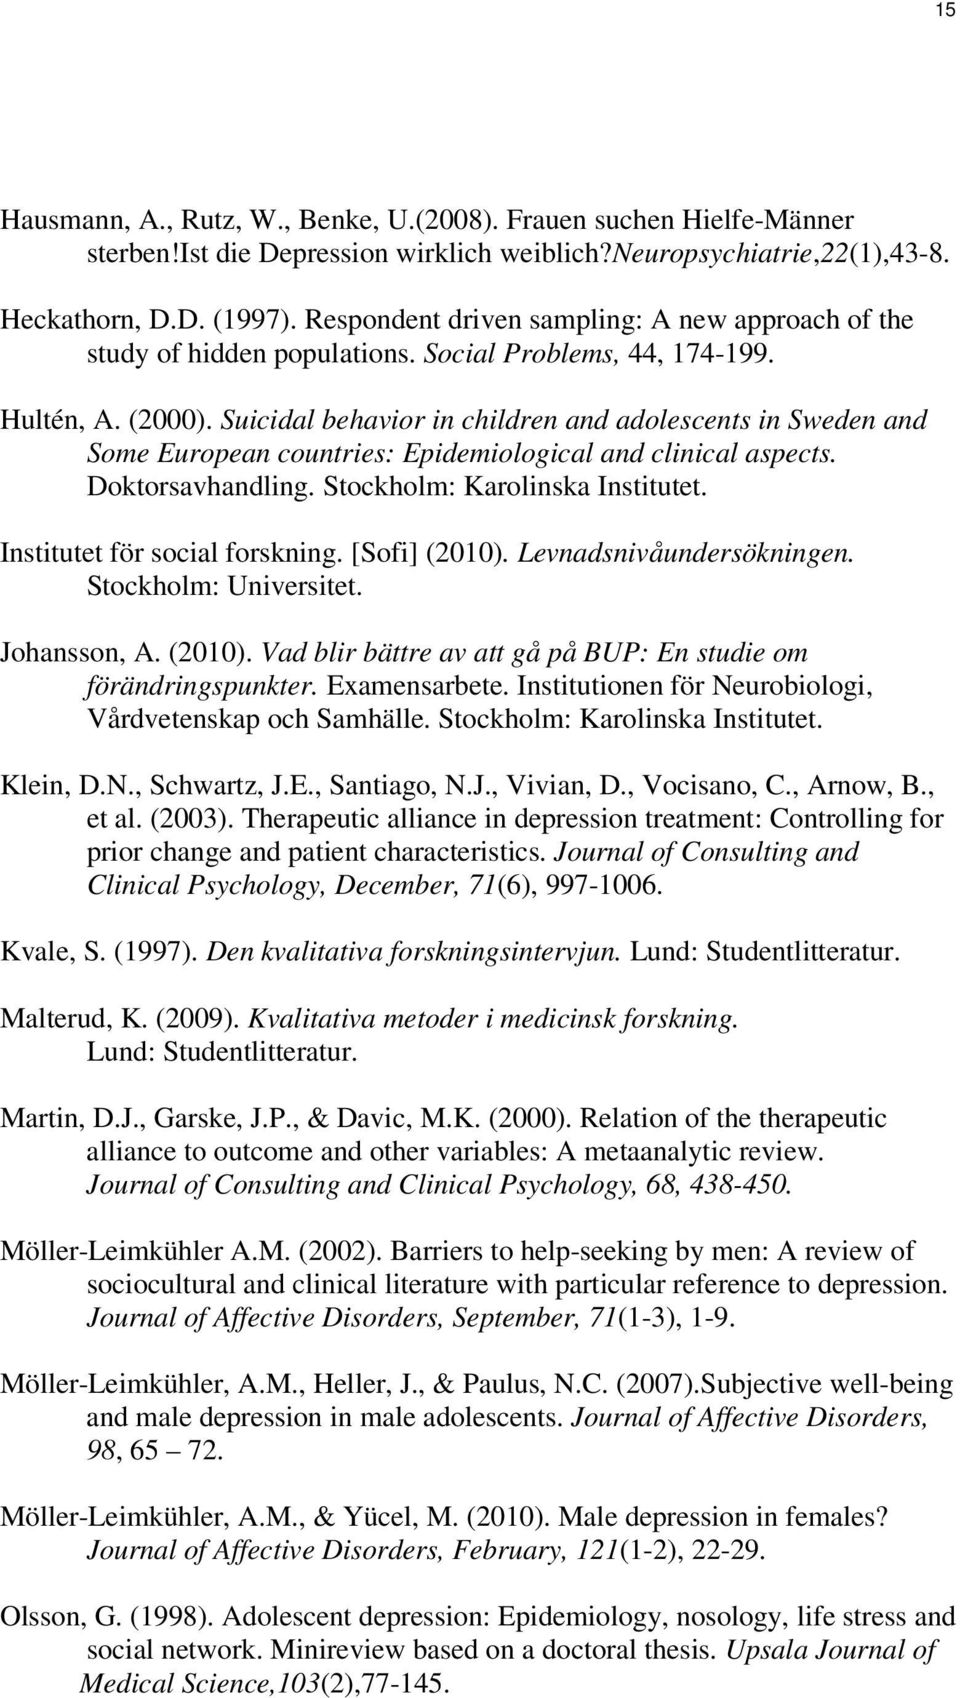 Suicidal behavior in children and adolescents in Sweden and Some European countries: Epidemiological and clinical aspects. Doktorsavhandling. Stockholm: Karolinska Institutet.